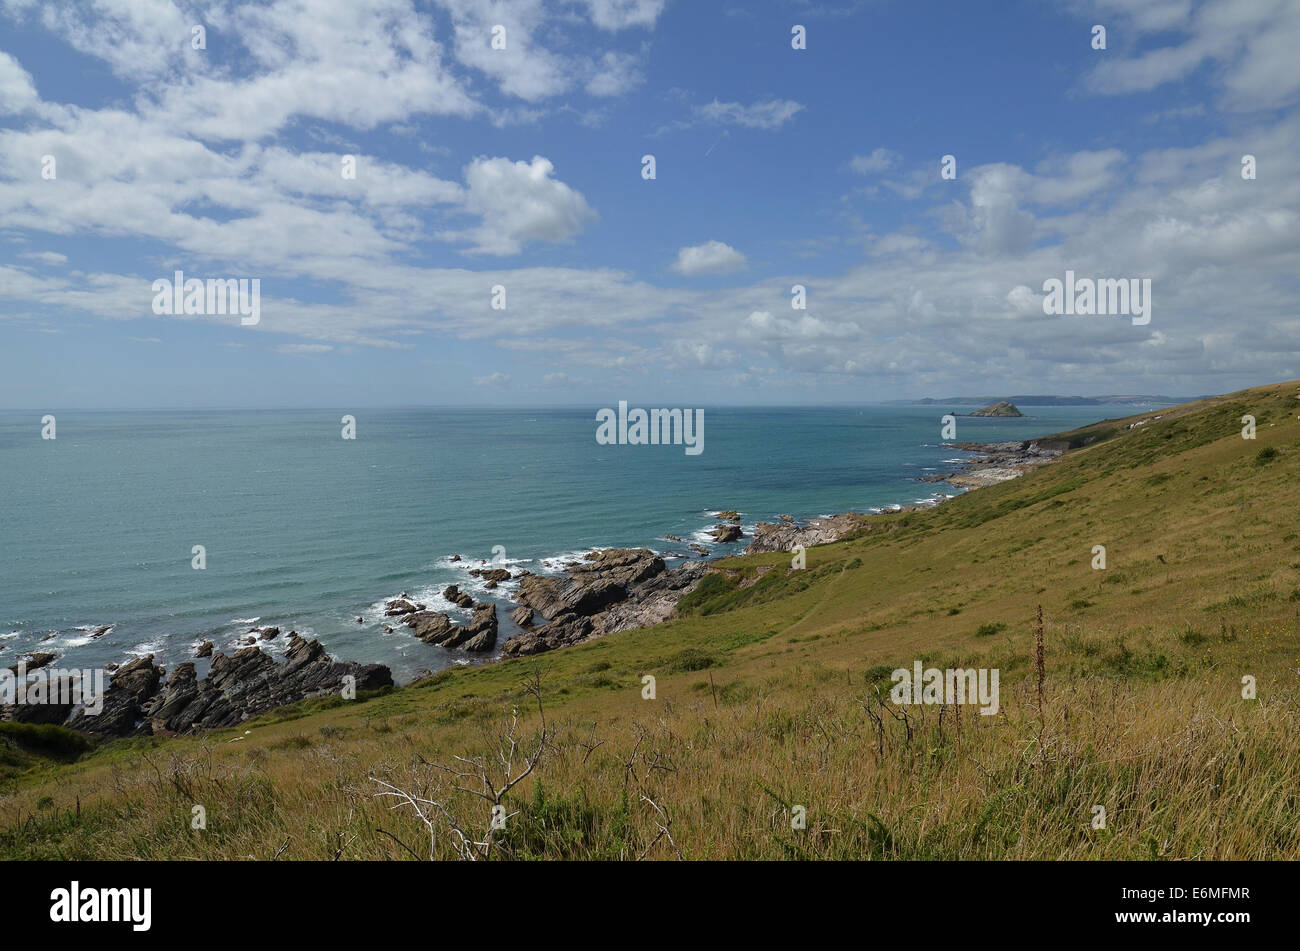 Looking out to sea with the Mewstone in the distance  from the rocky cliffs in Noss Mayo, Devon. Stock Photo